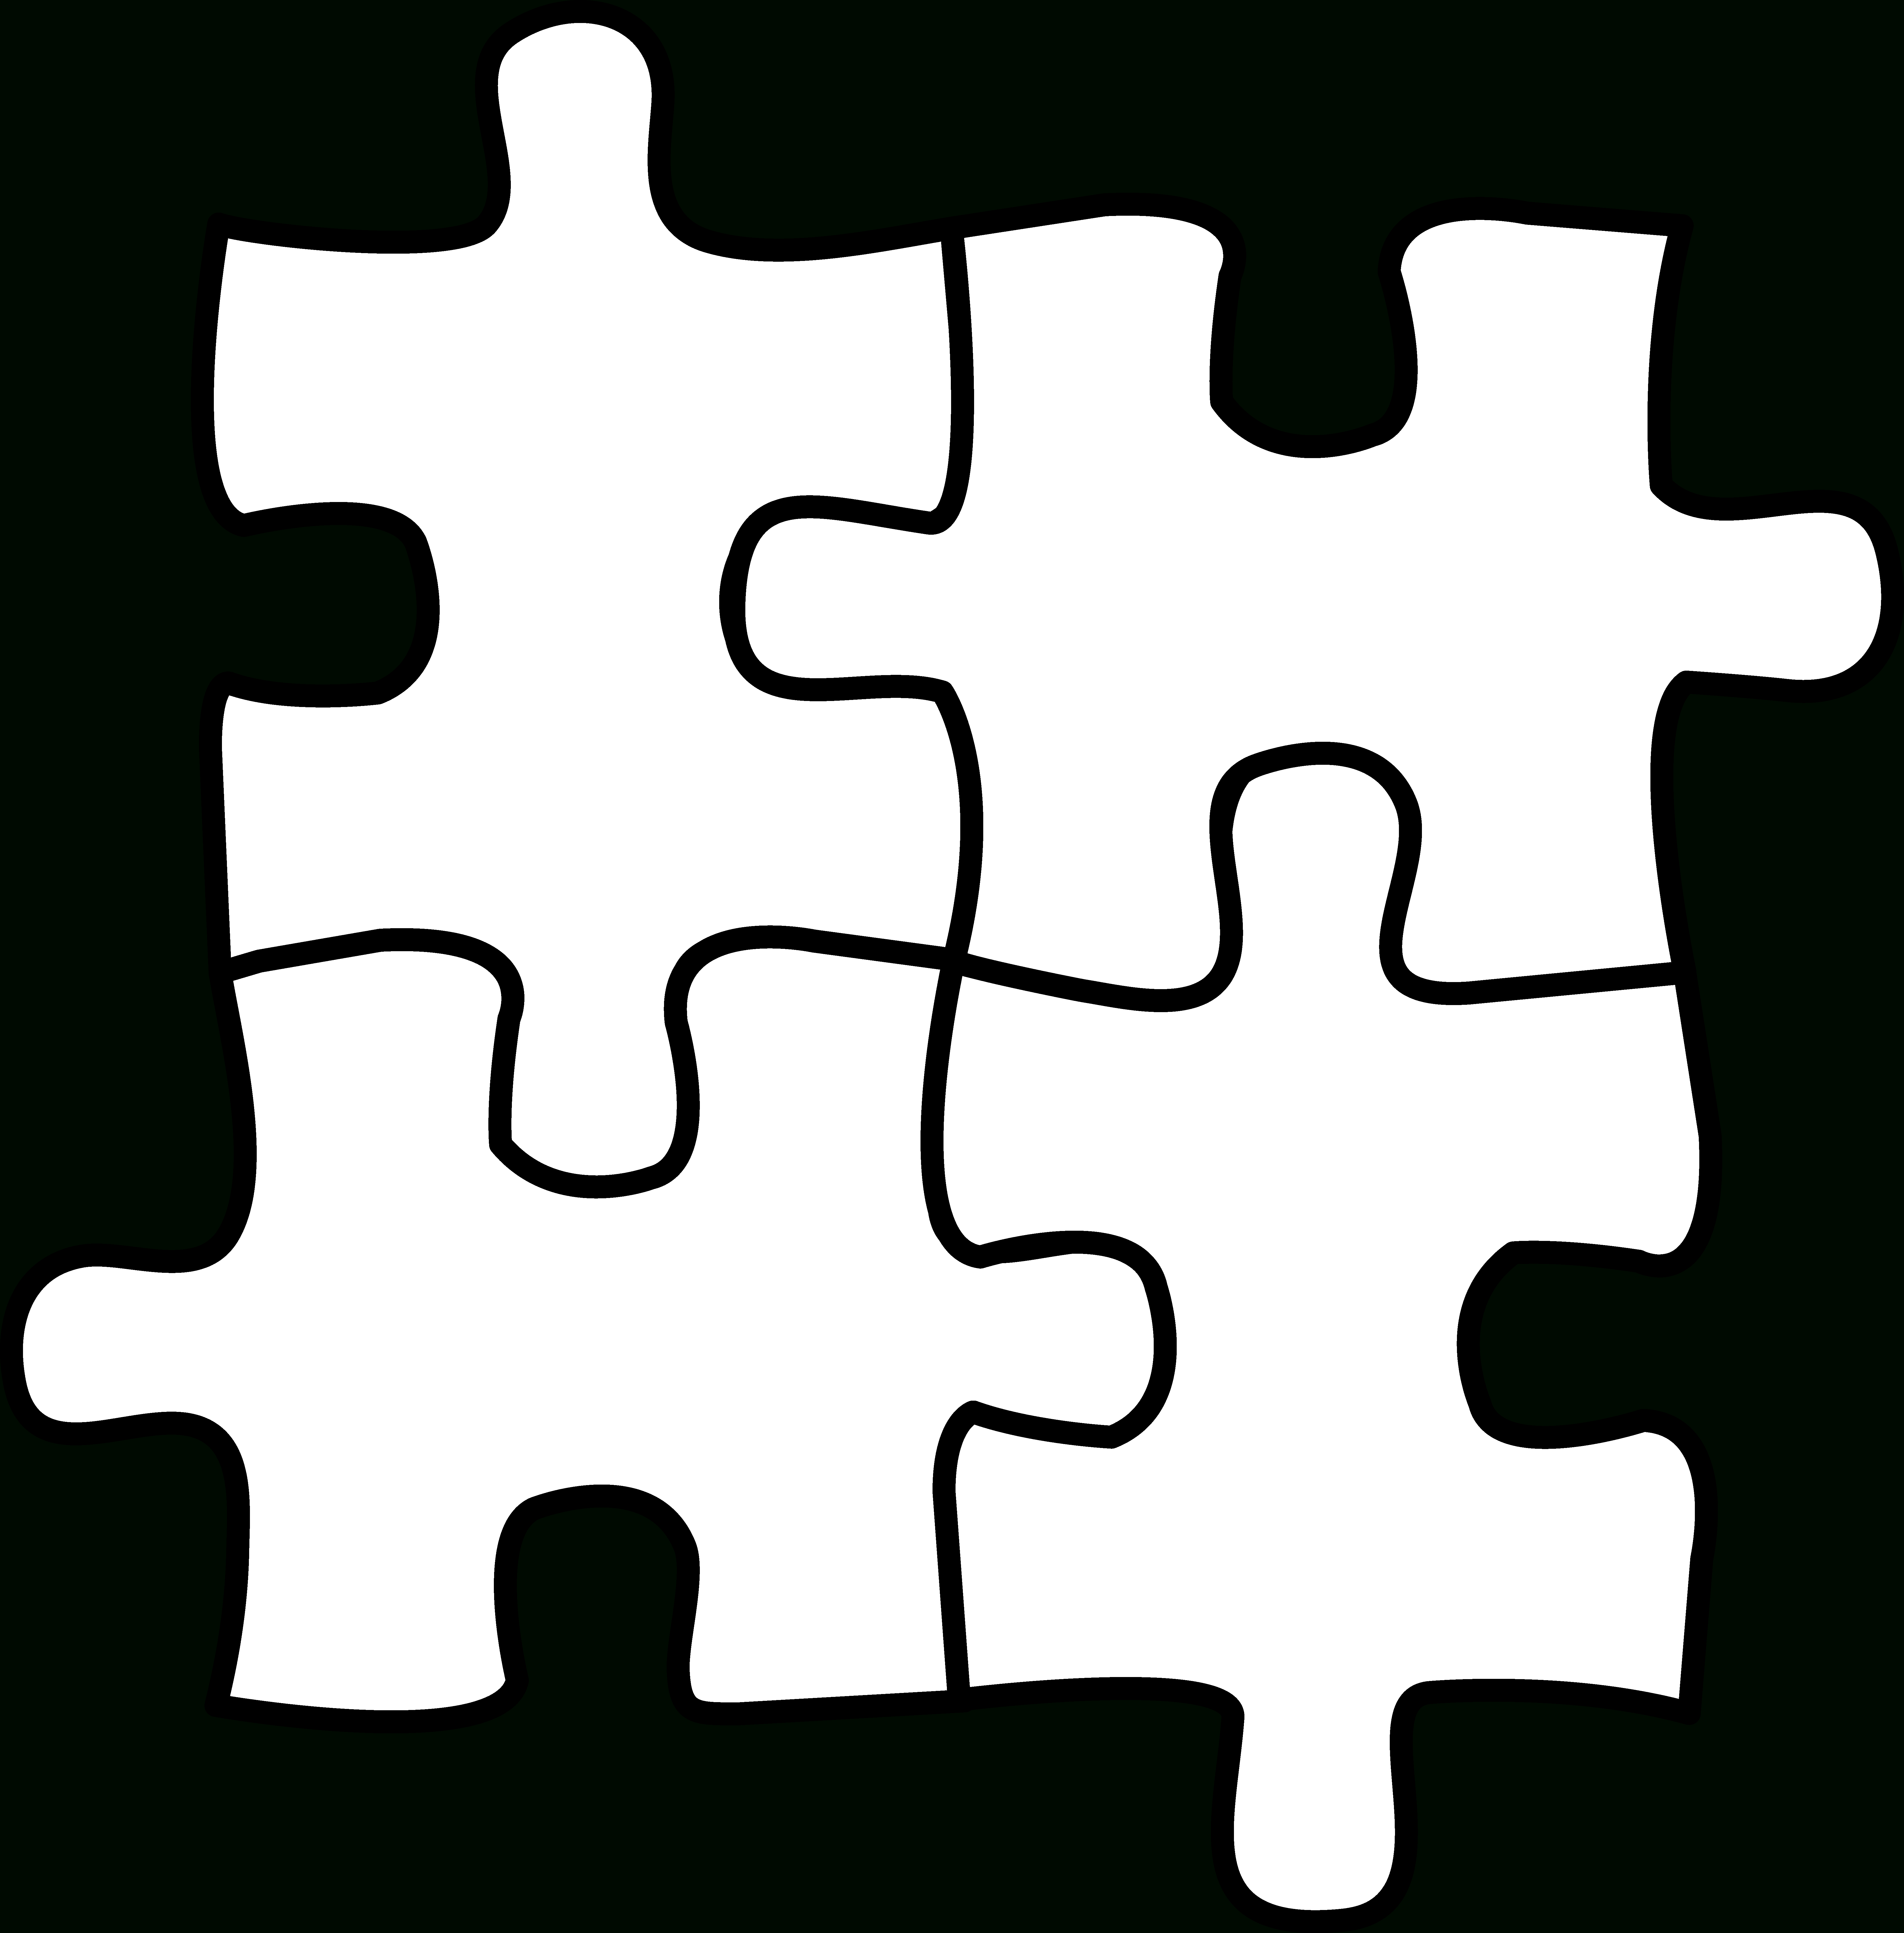 10 Pics Of Puzzle Piece Coloring Pages Of Letters - Autism Puzzle - Printable Autism Puzzle Piece